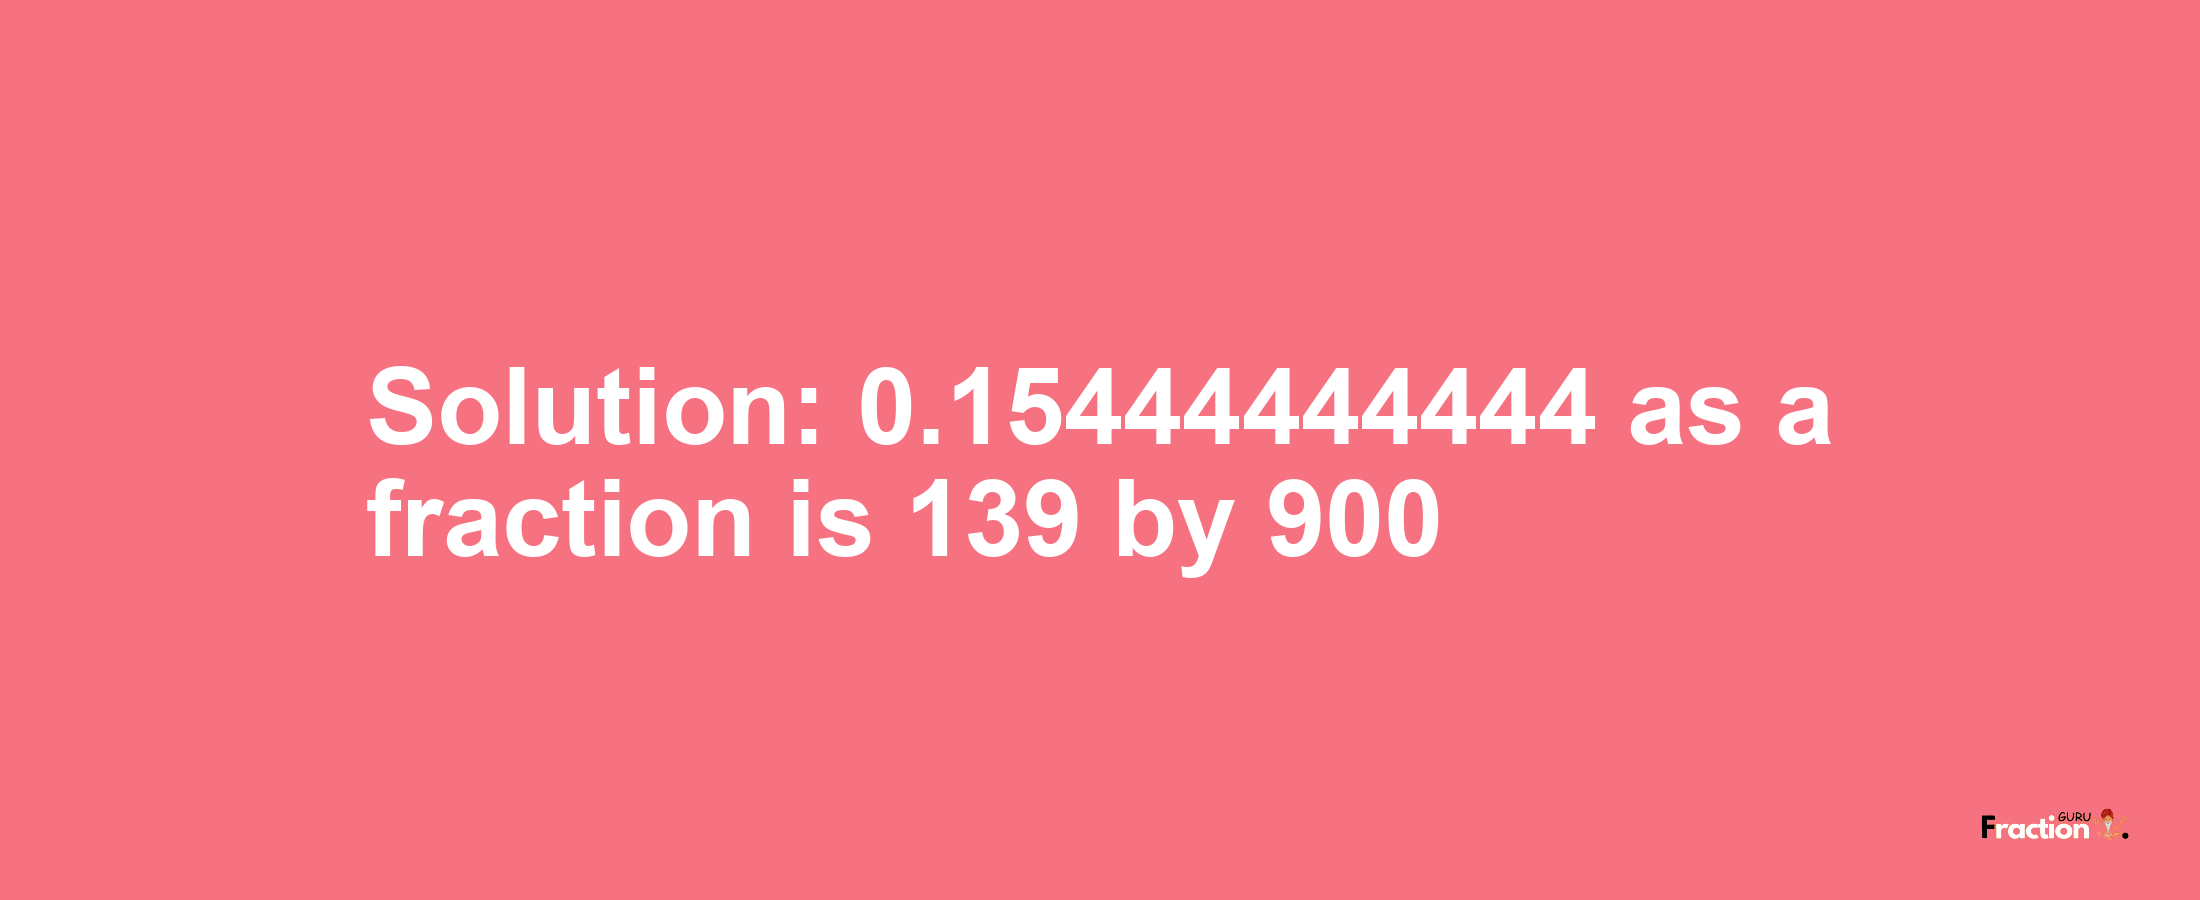 Solution:0.15444444444 as a fraction is 139/900